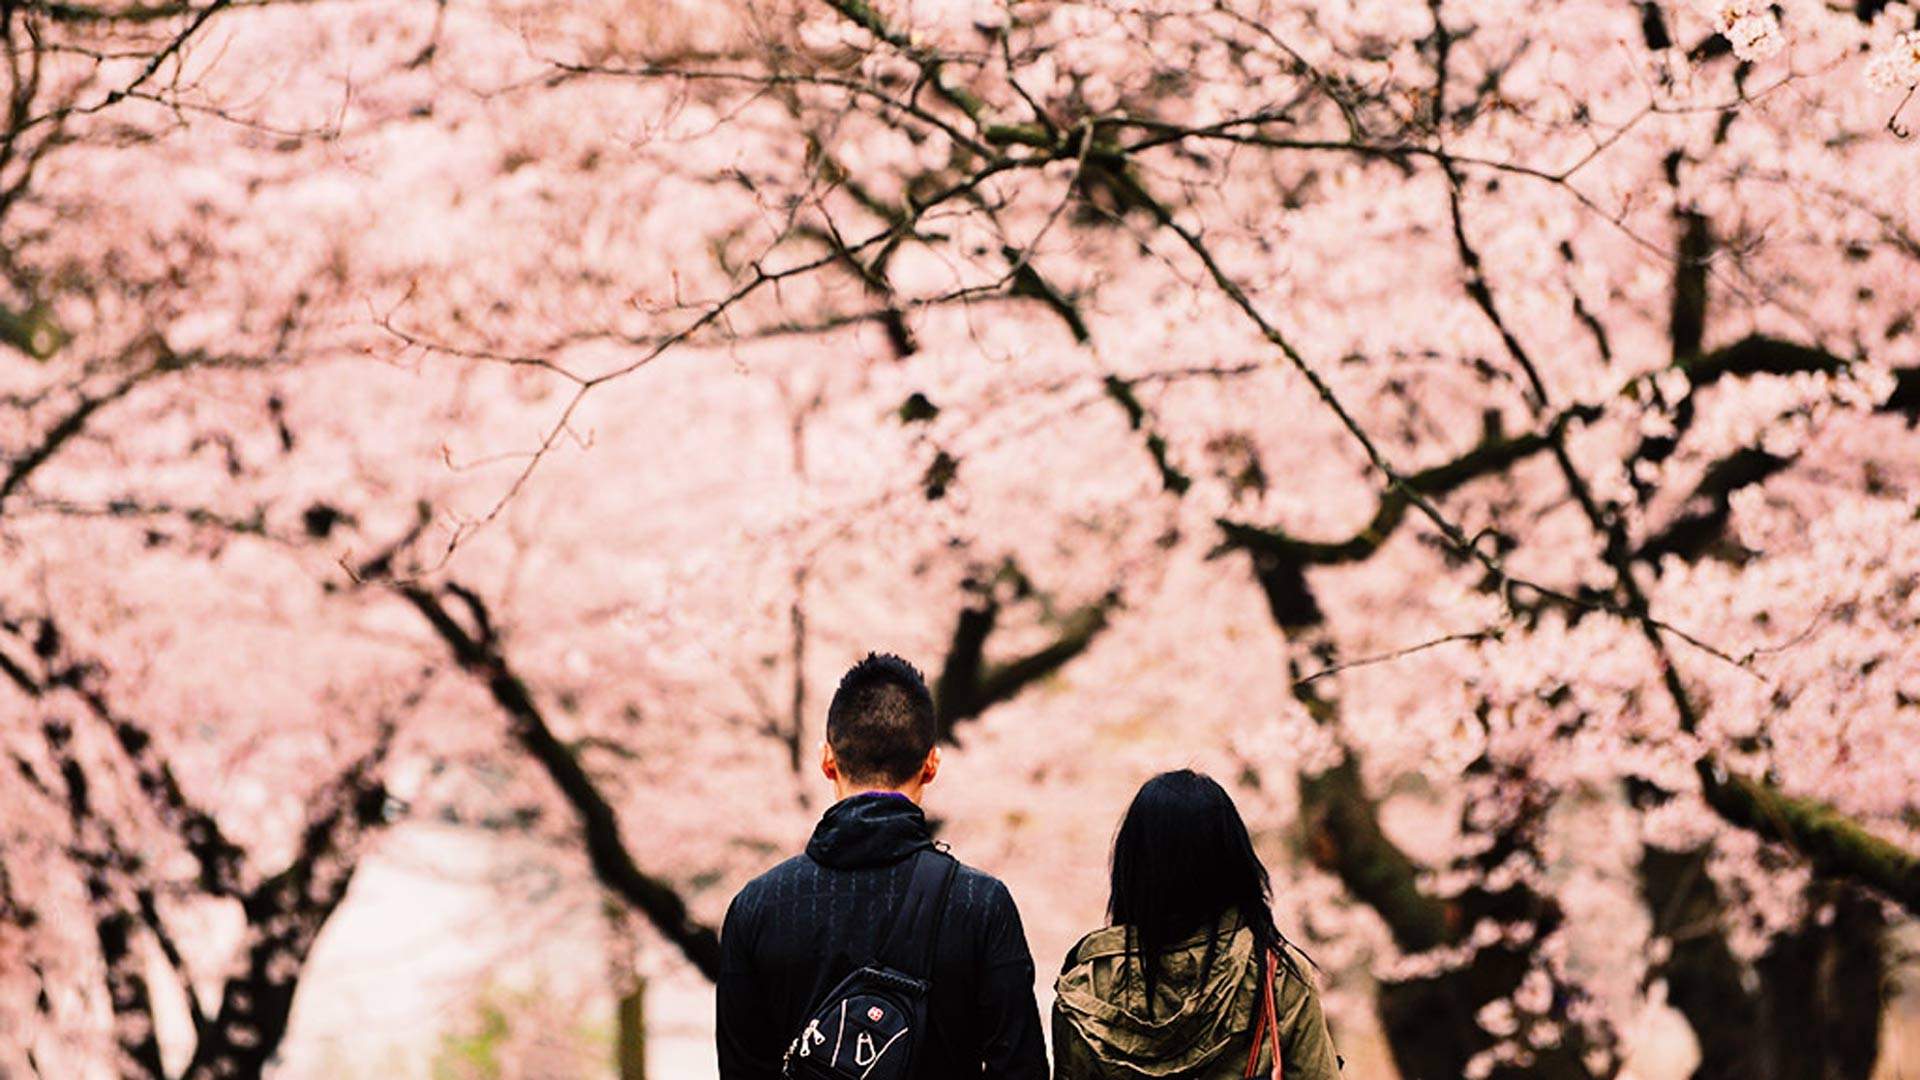 We're Giving Away a VIP Experience at the Sydney Cherry Blossom Festival